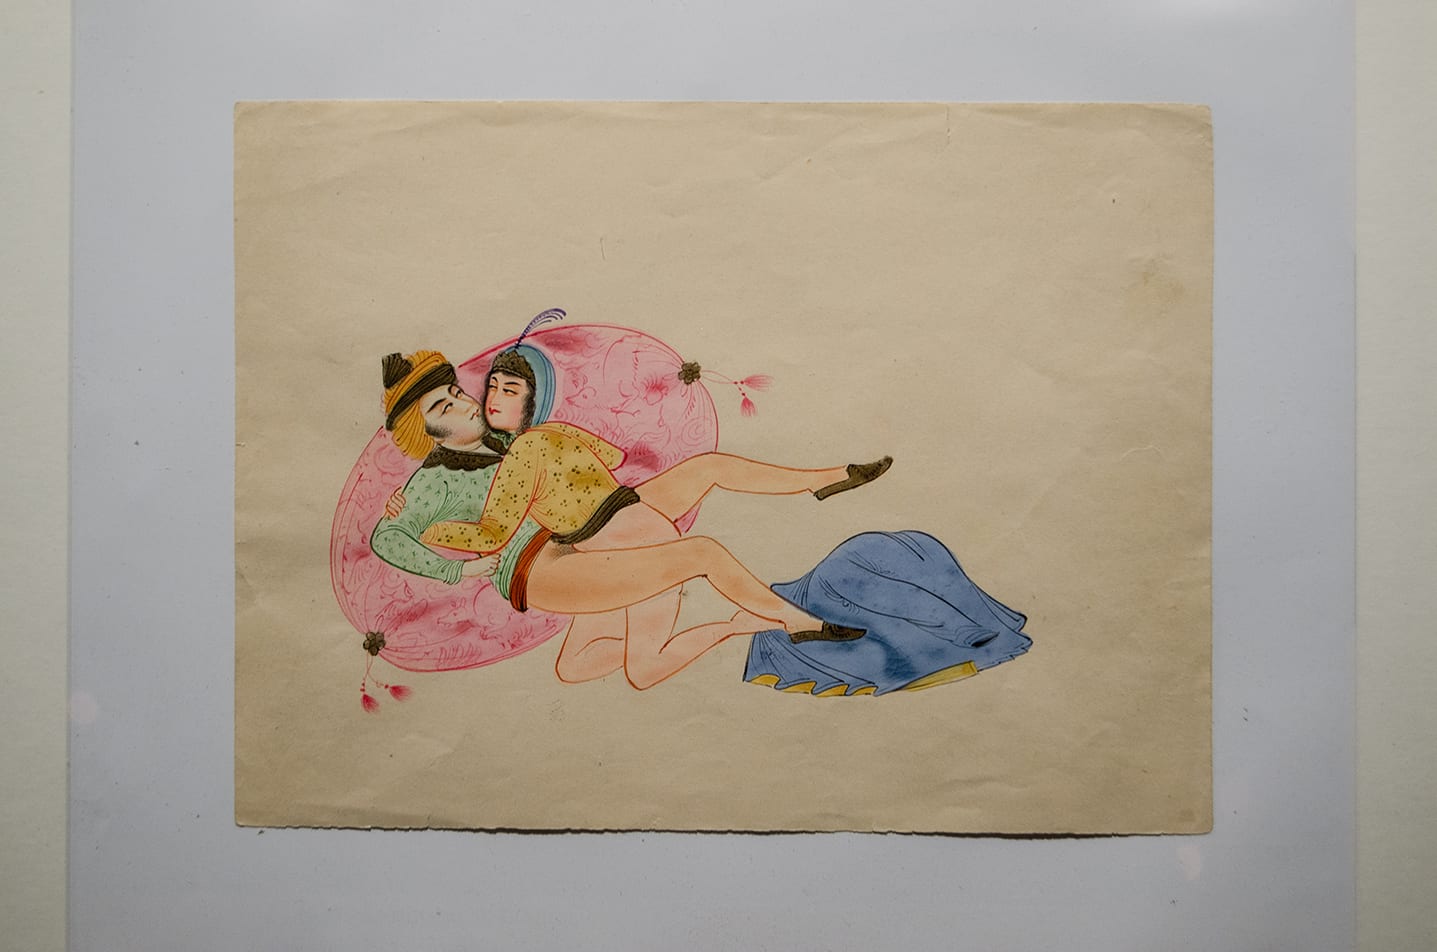 146 - Late Mughal Empire Erotic Manuscript / Painting Inspired by the Kama Sutra, 18th Century CE - 19th Century CE | Barakat Gallery